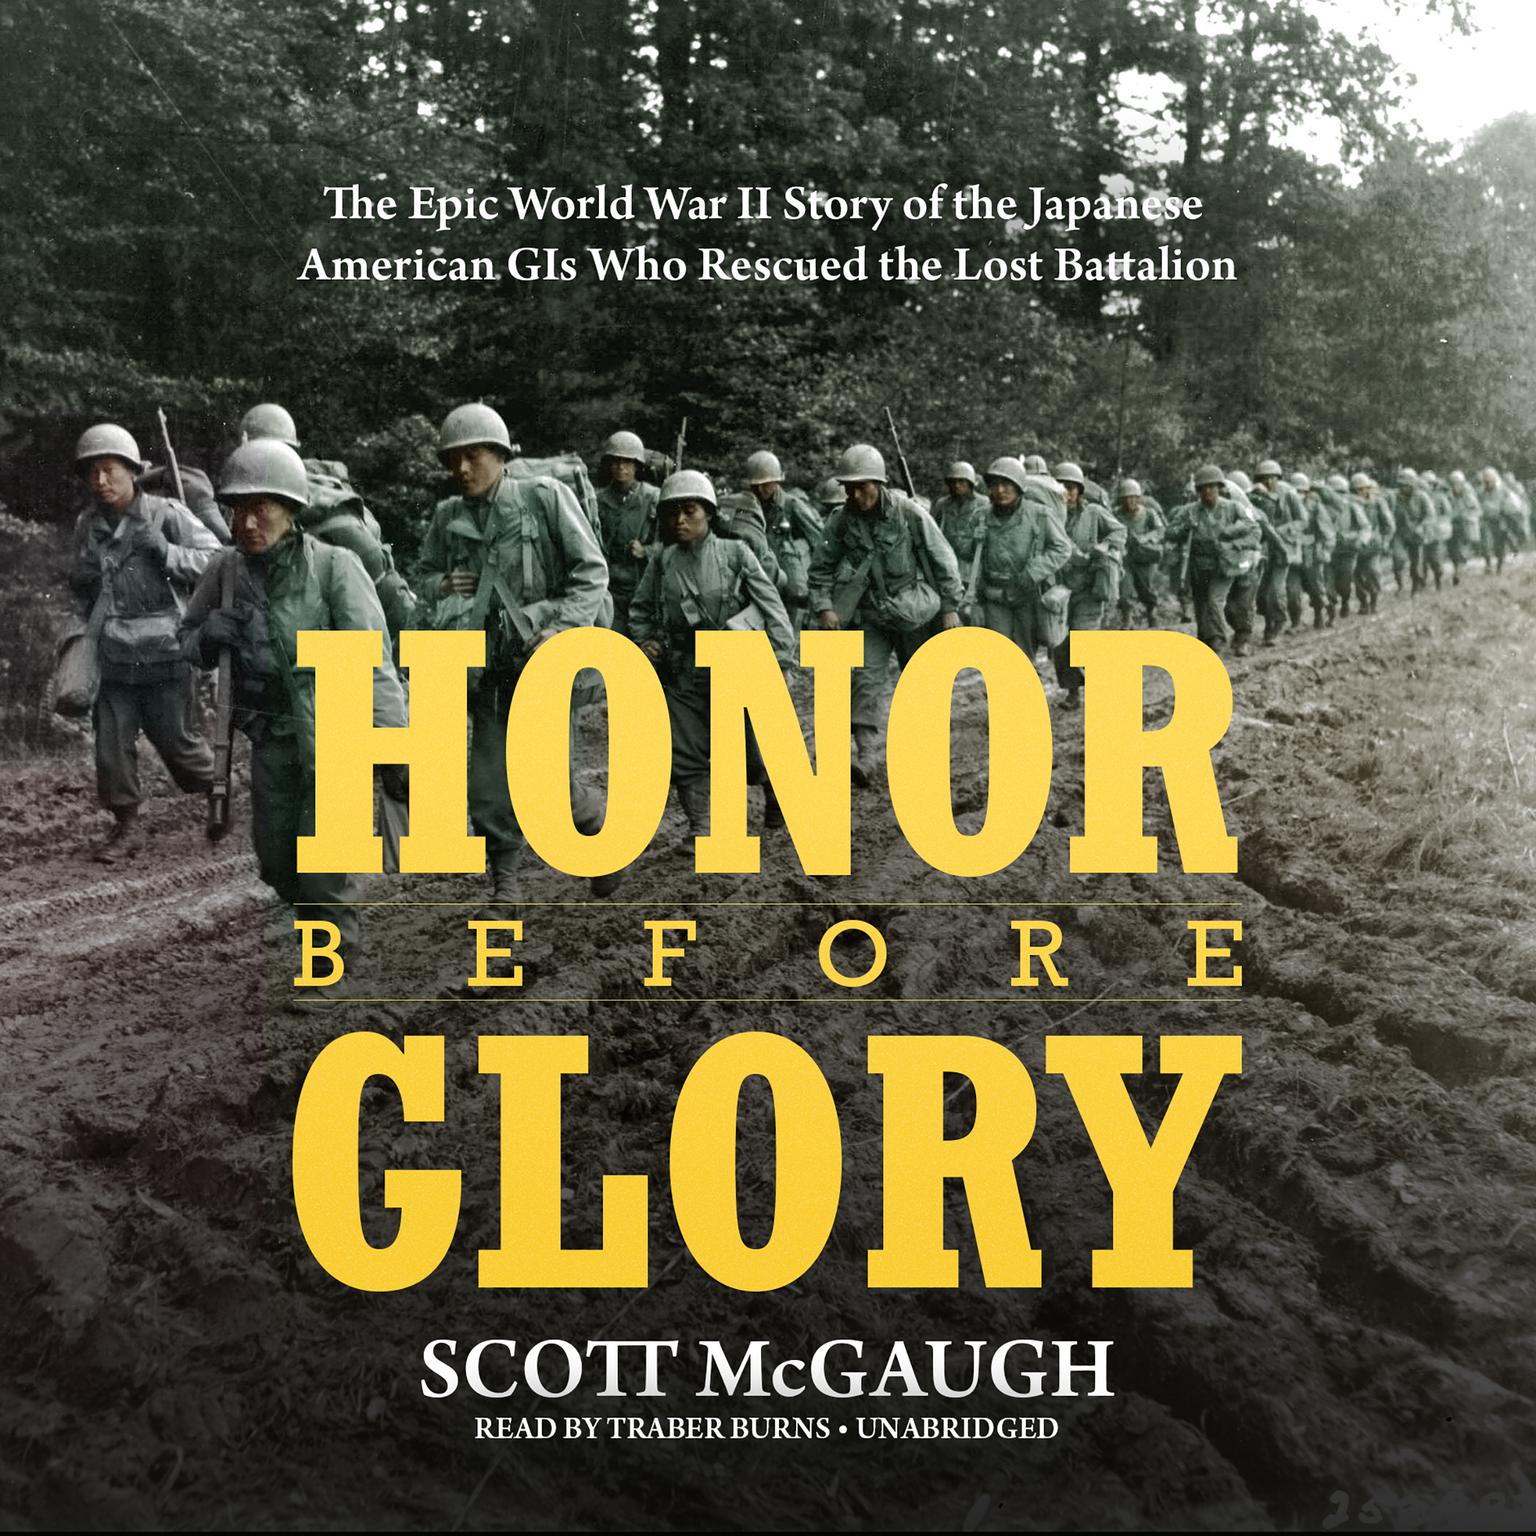 Honor before Glory: The Epic World War II Story of the Japanese American GIs Who Rescued the Lost Battalion  Audiobook, by Scott McGaugh